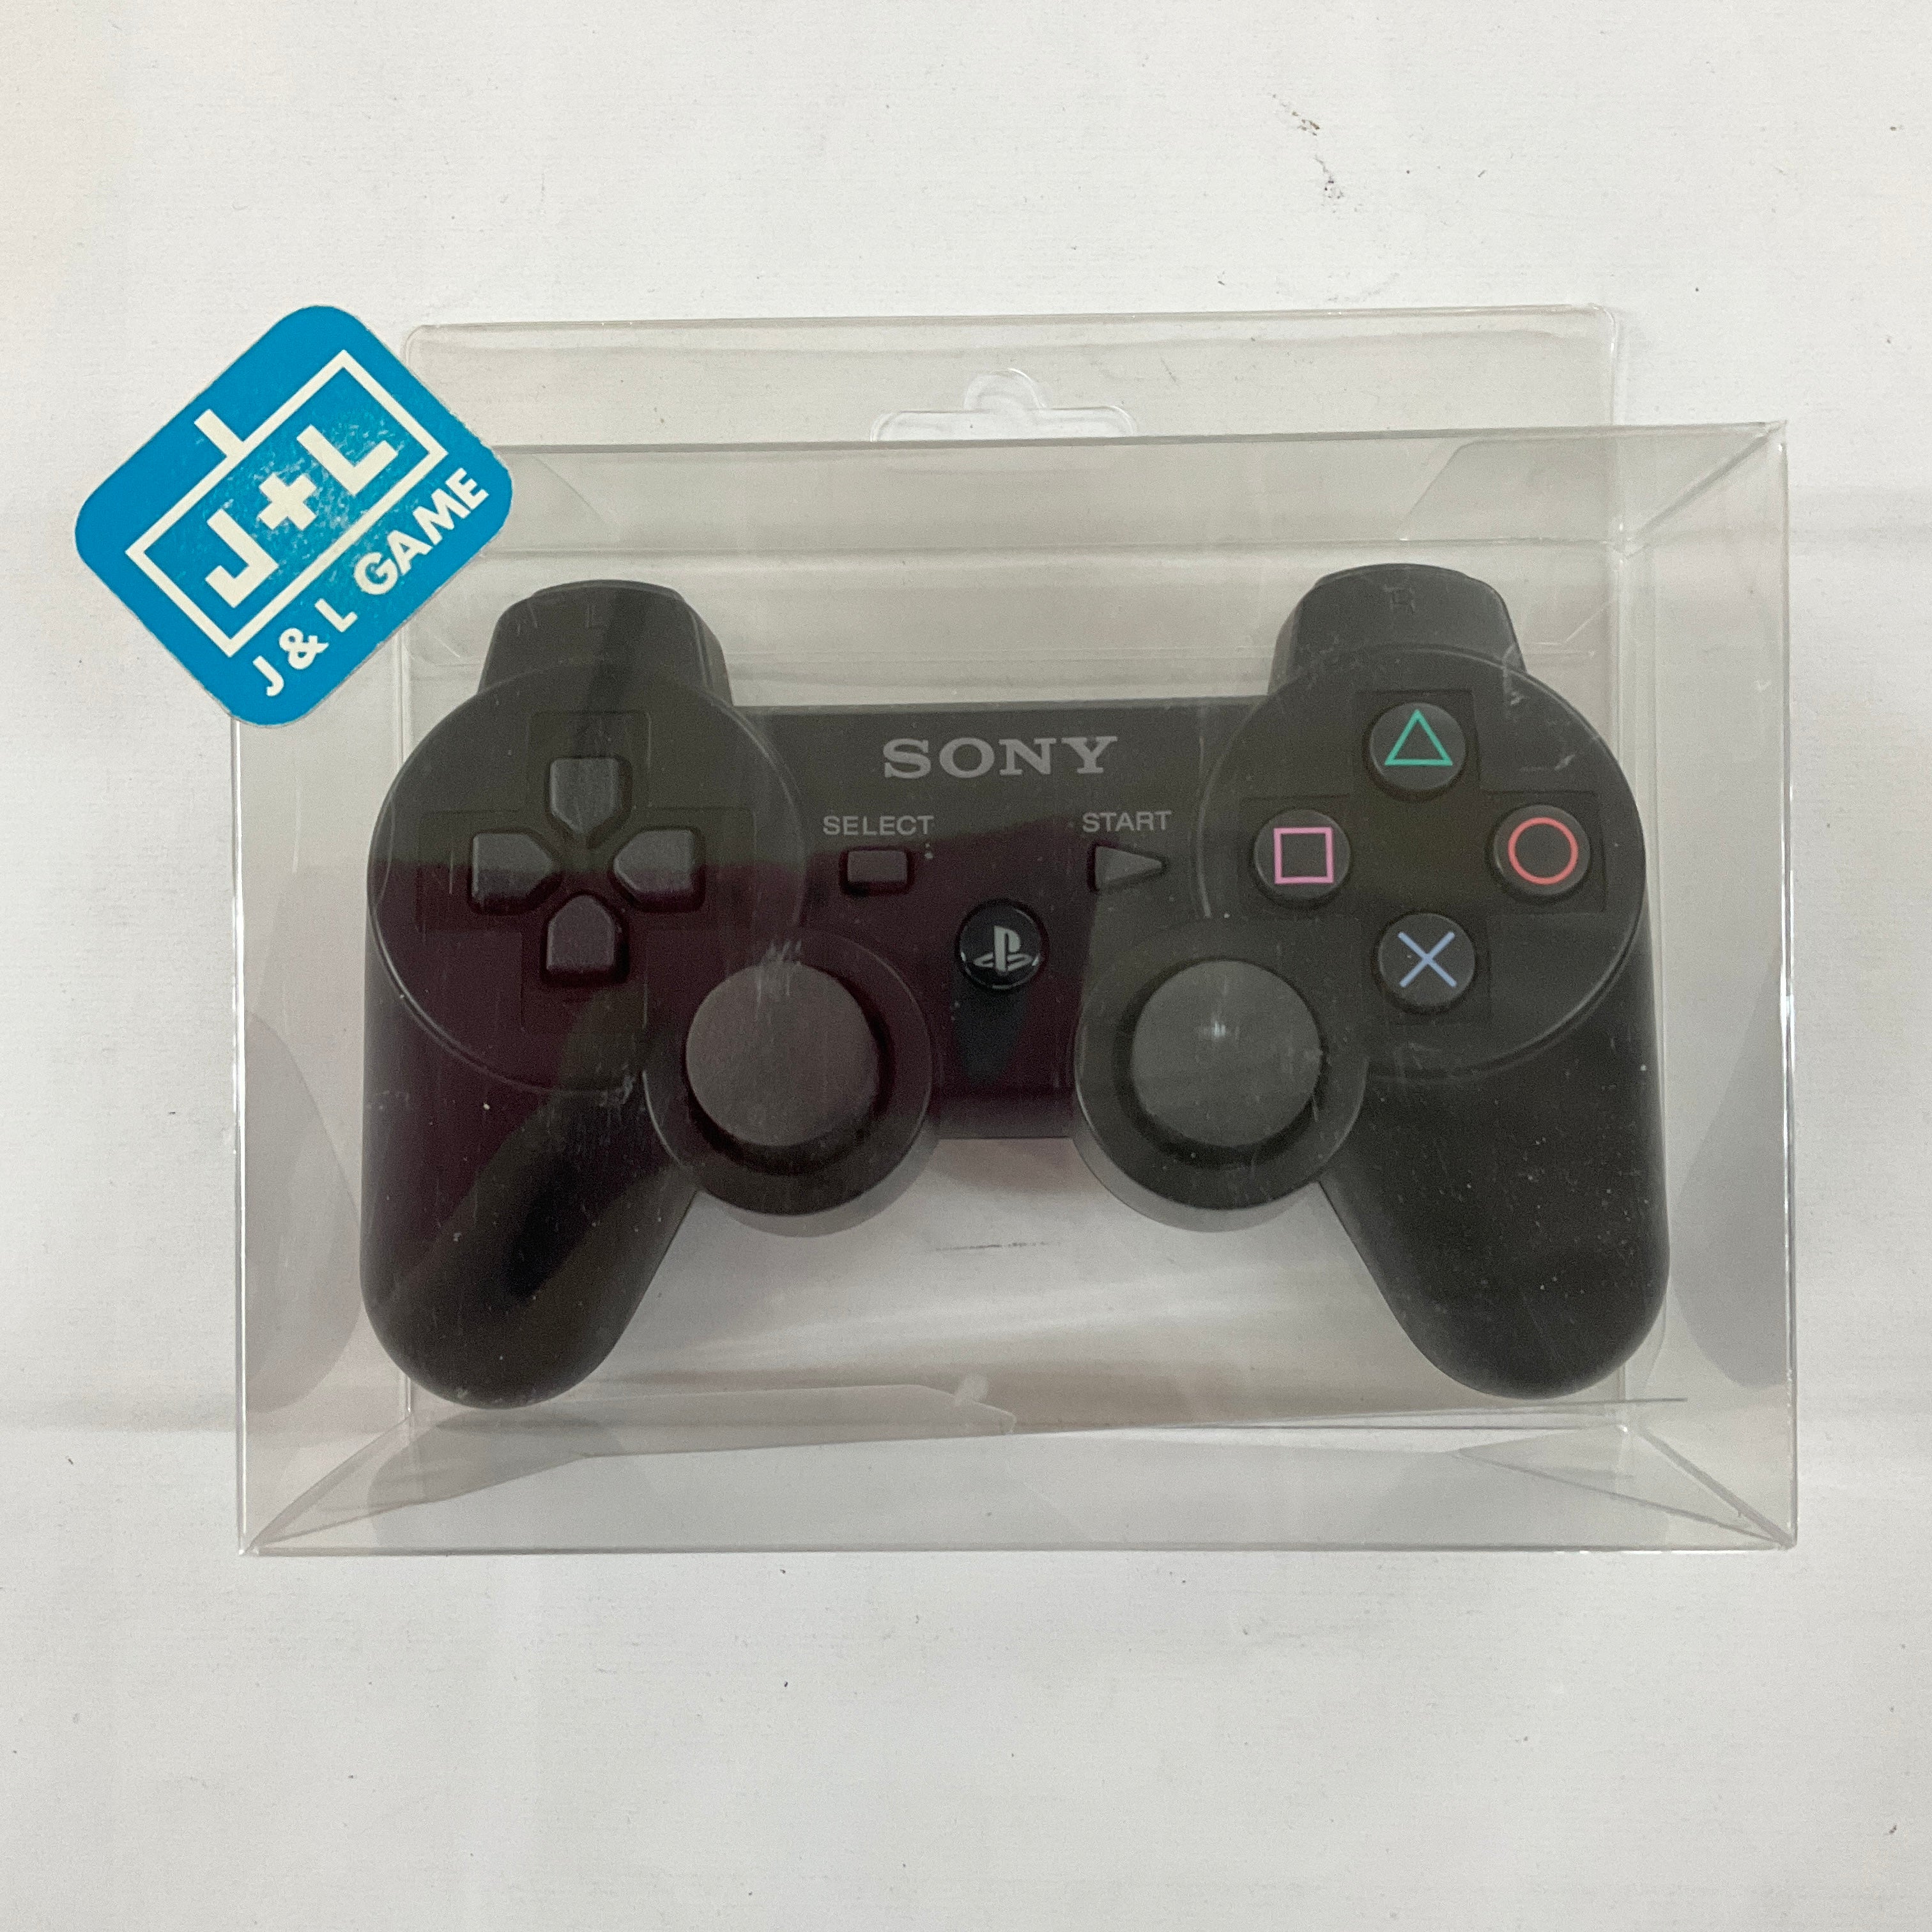 SONY PlayStation 3 DualShock Wireless Controller (Black) - (PS3) PlayStation 3 [Pre-Owned]